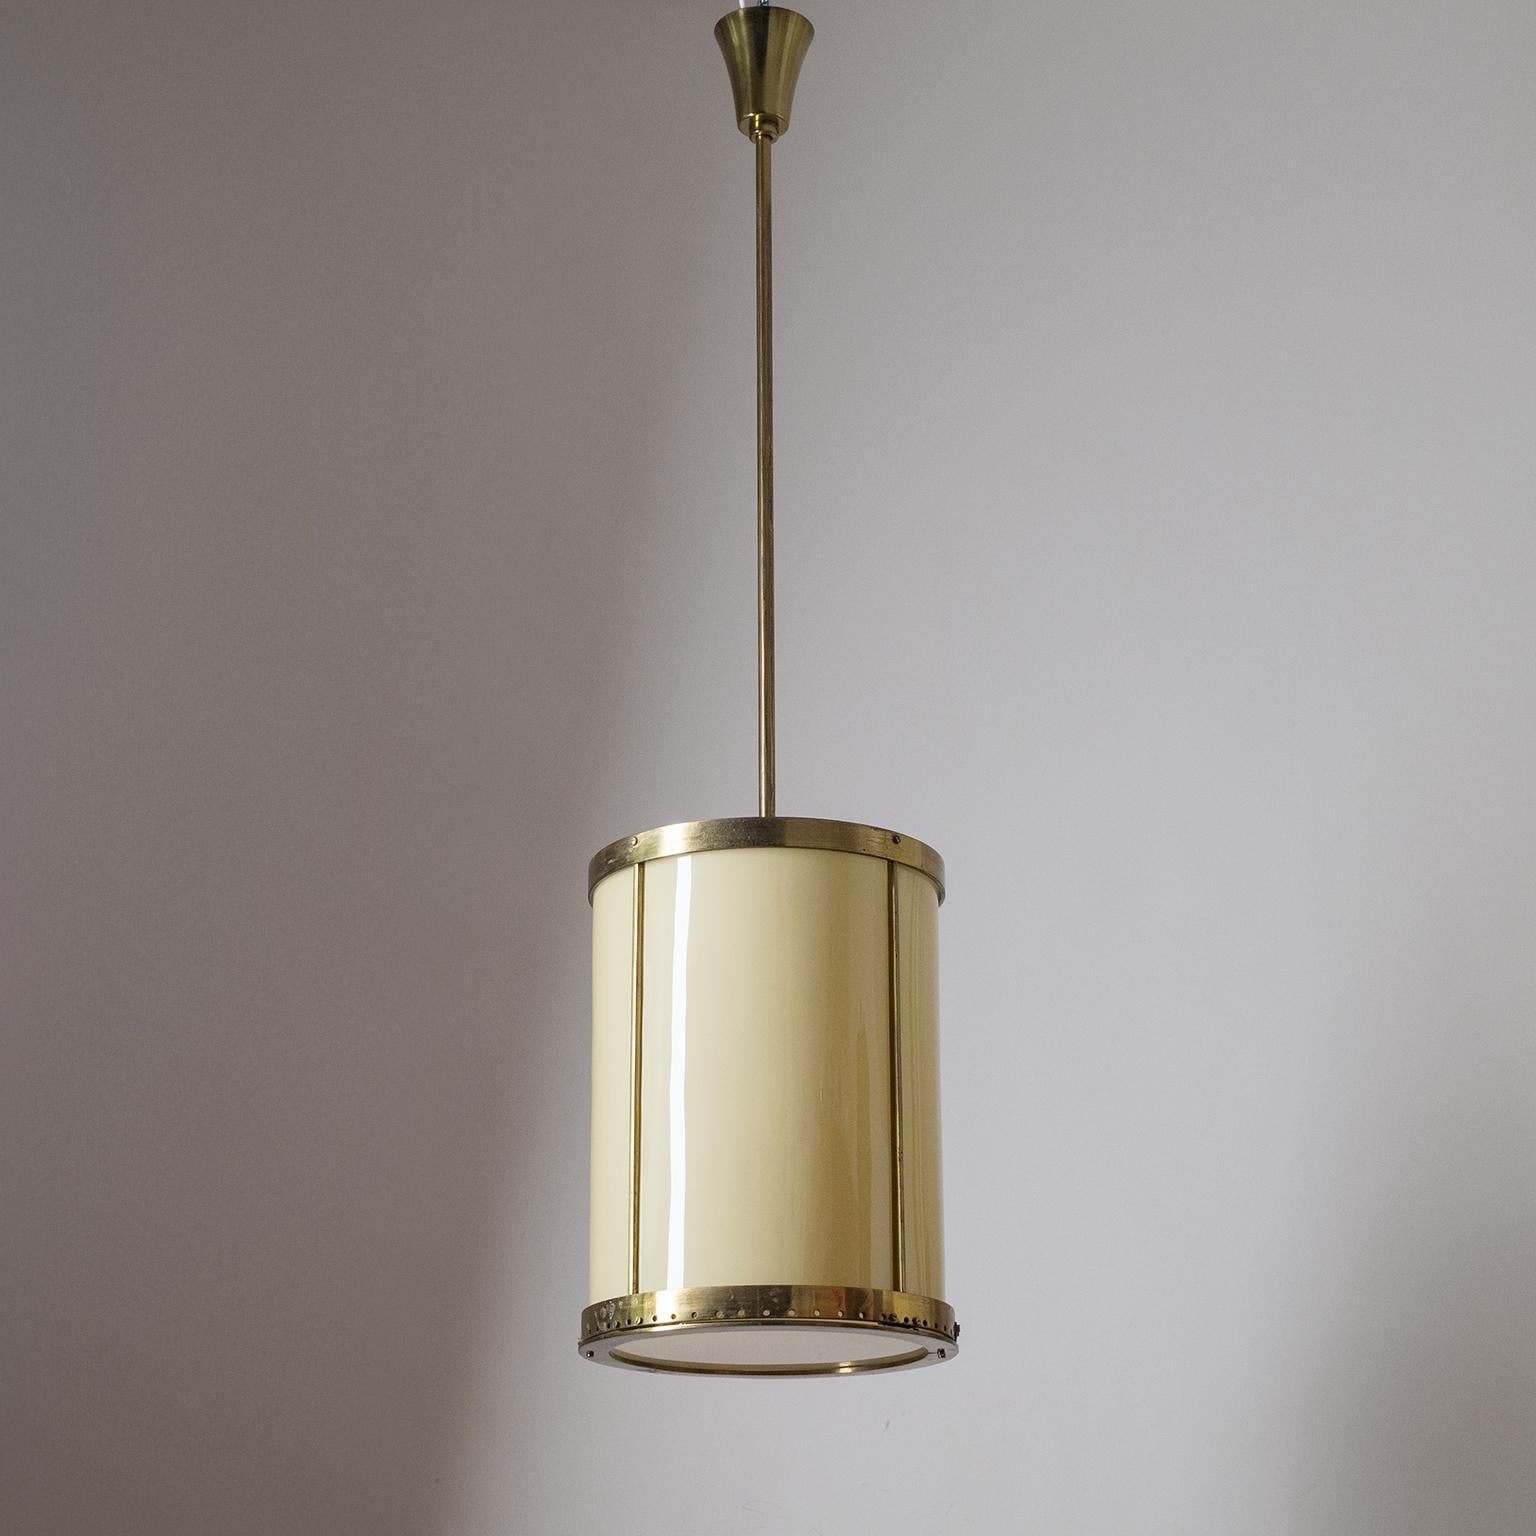 Oversize Drum Lantern, 1930s, Sand-Colored Glass and Brass For Sale 9